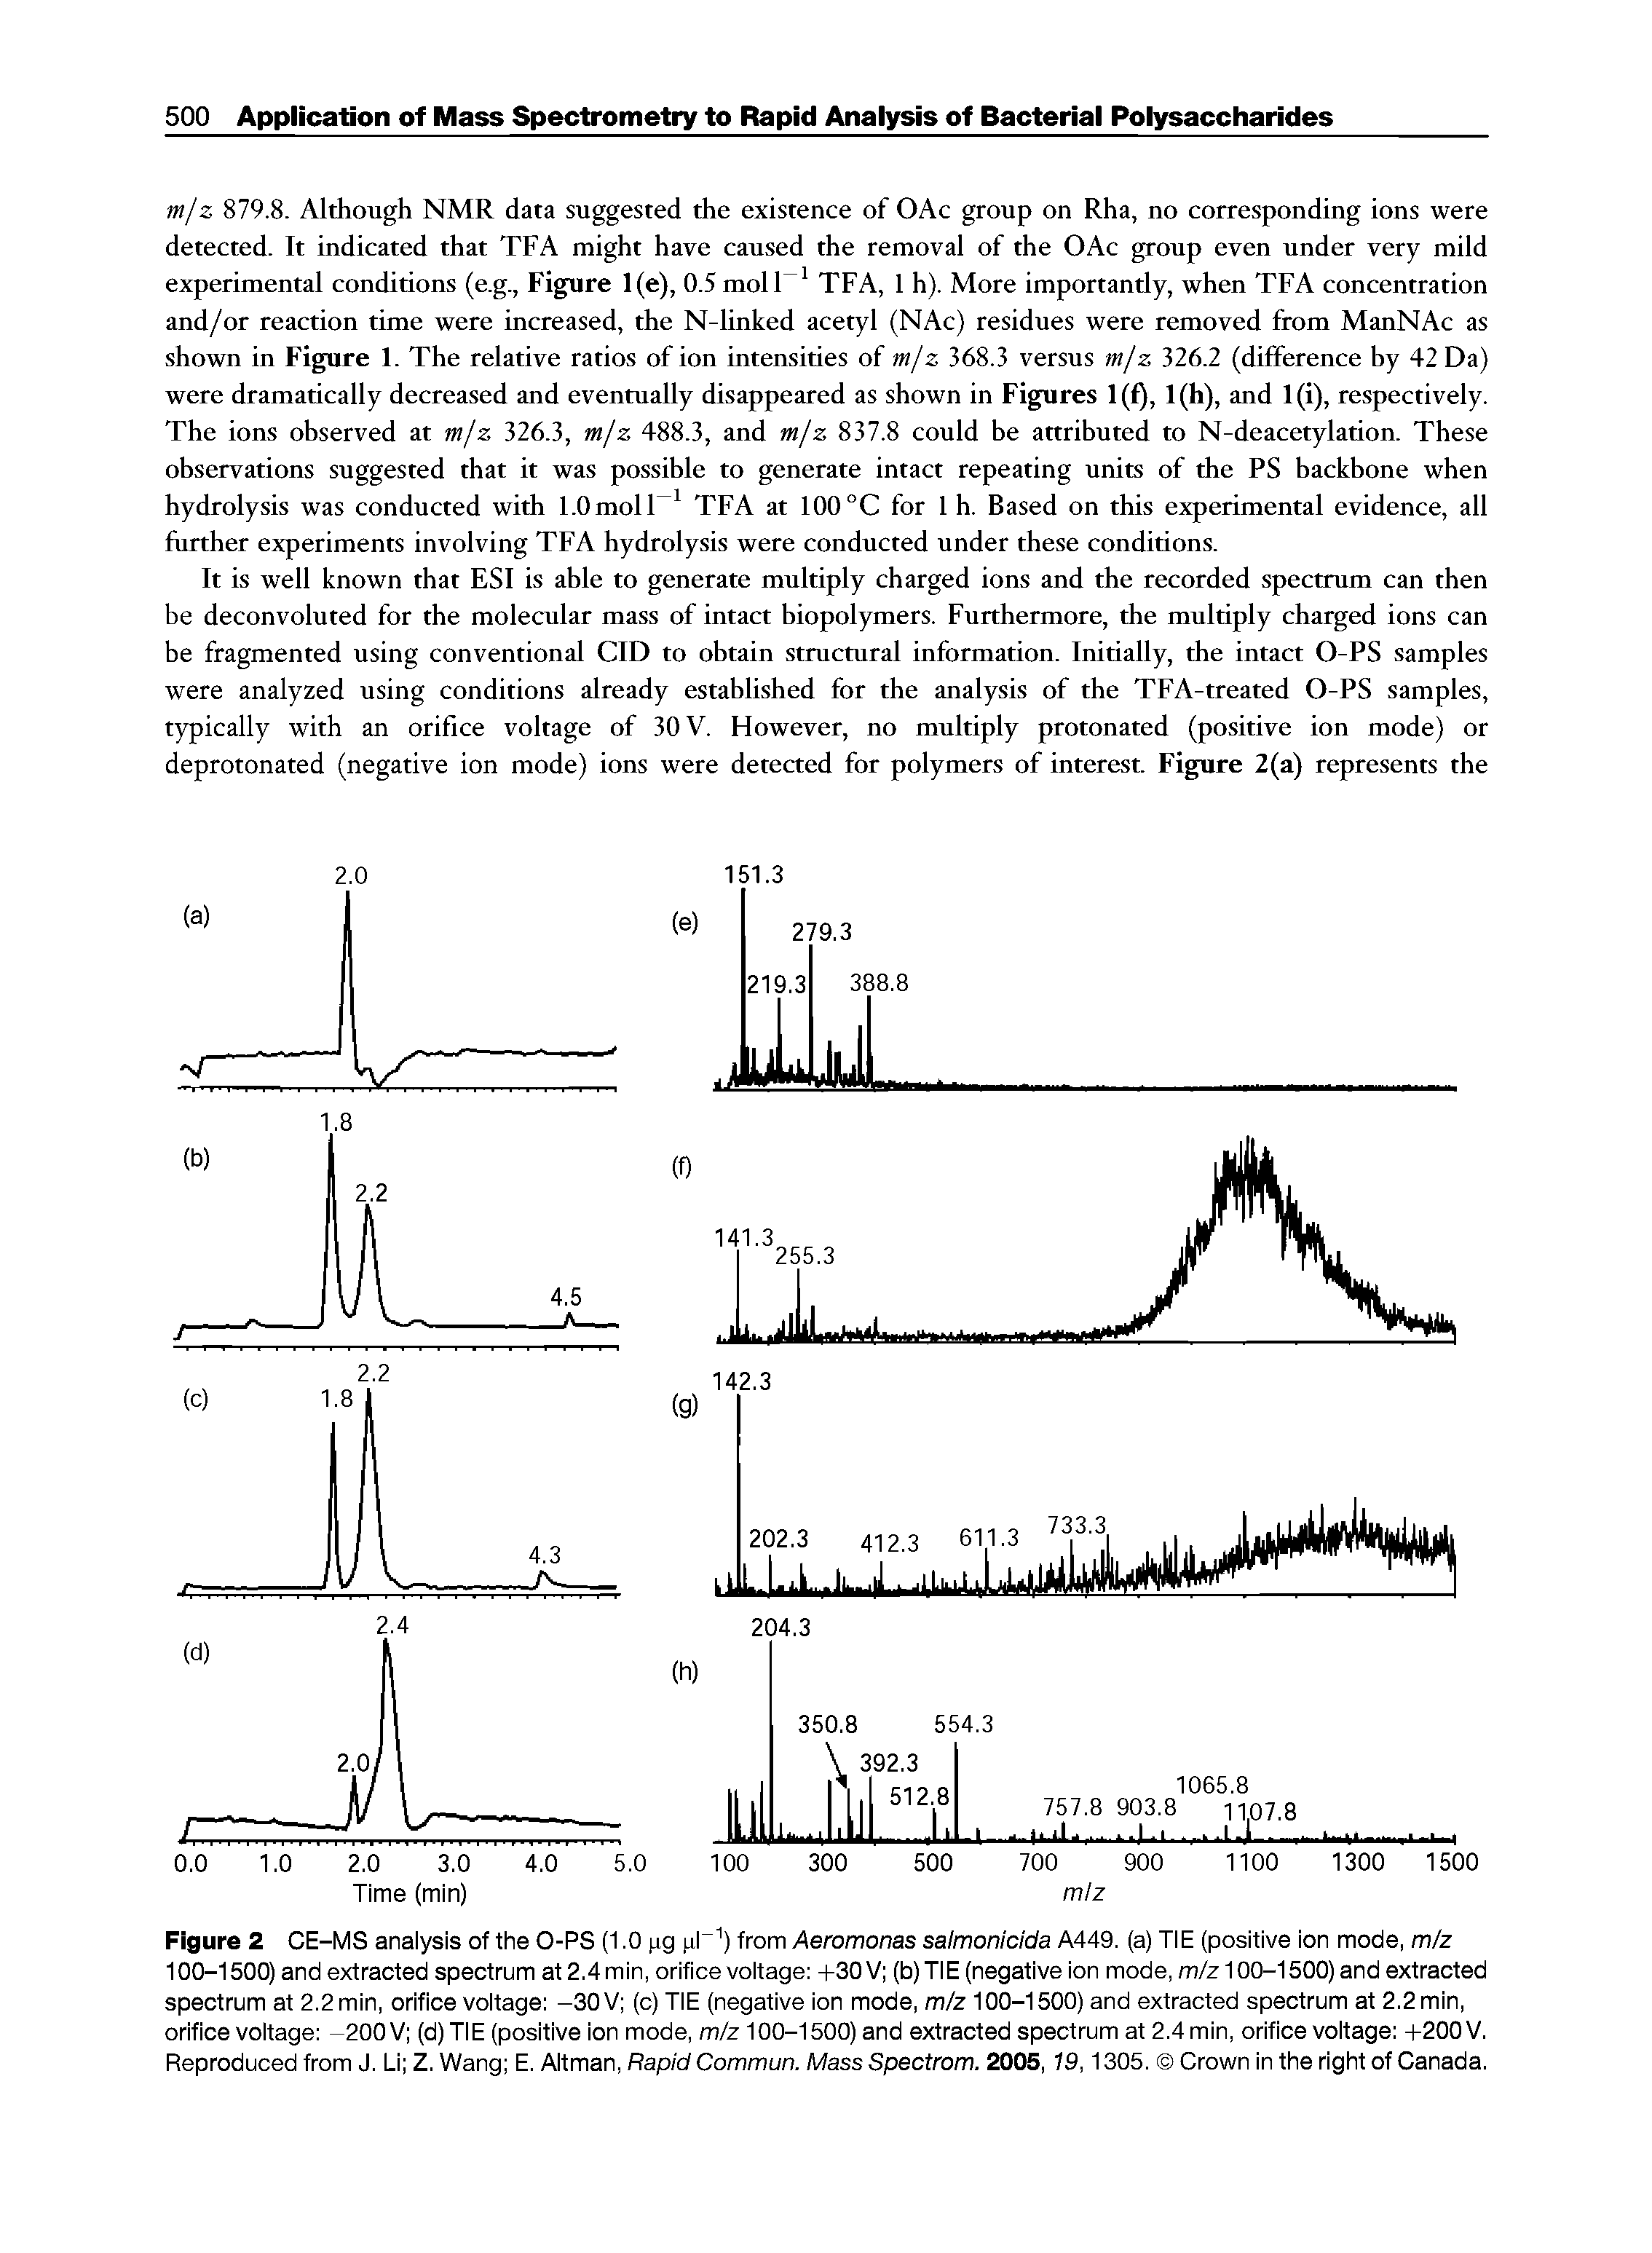 Figure 2 CE-MS analysis of the O-PS (1.0 pg pF1) from Aeromonas salmonicida A449. (a) TIE (positive ion mode, m/z 100-1500) and extracted spectrum at 2.4 min, orifice voltage +30 V (b)TIE (negative ion mode, m/z 100-1500) and extracted spectrum at 2.2 min, orifice voltage -30 V (c) TIE (negative ion mode, m/z 100-1500) and extracted spectrum at 2.2 min, orifice voltage -200 V (d) TIE (positive ion mode, m/z 100-1500) and extracted spectrum at 2.4 min, orifice voltage +200 V. Reproduced from J. Li Z. Wang E. Altman, Rapid Commun. Mass Spectrom. 2005, 19,1305. Crown in the right of Canada.